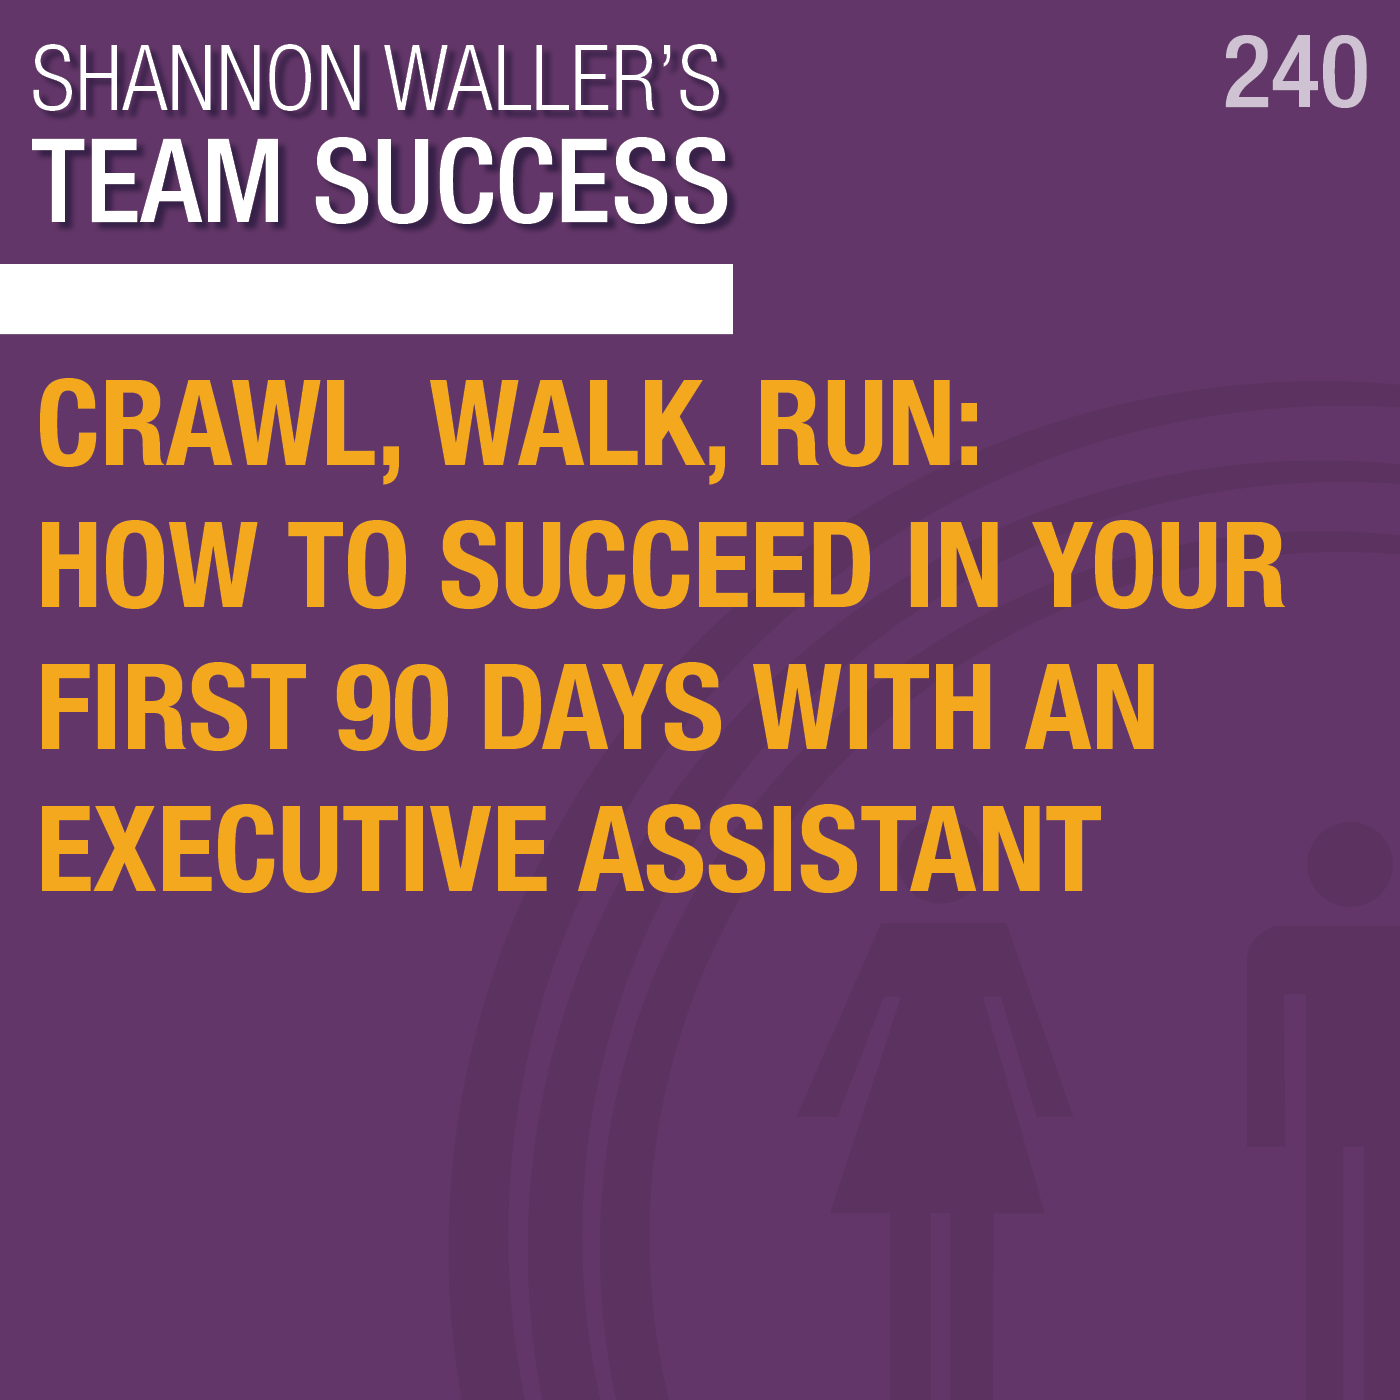 Crawl, Walk, Run: How To Succeed In Your First 90 Days With An Executive Assistant